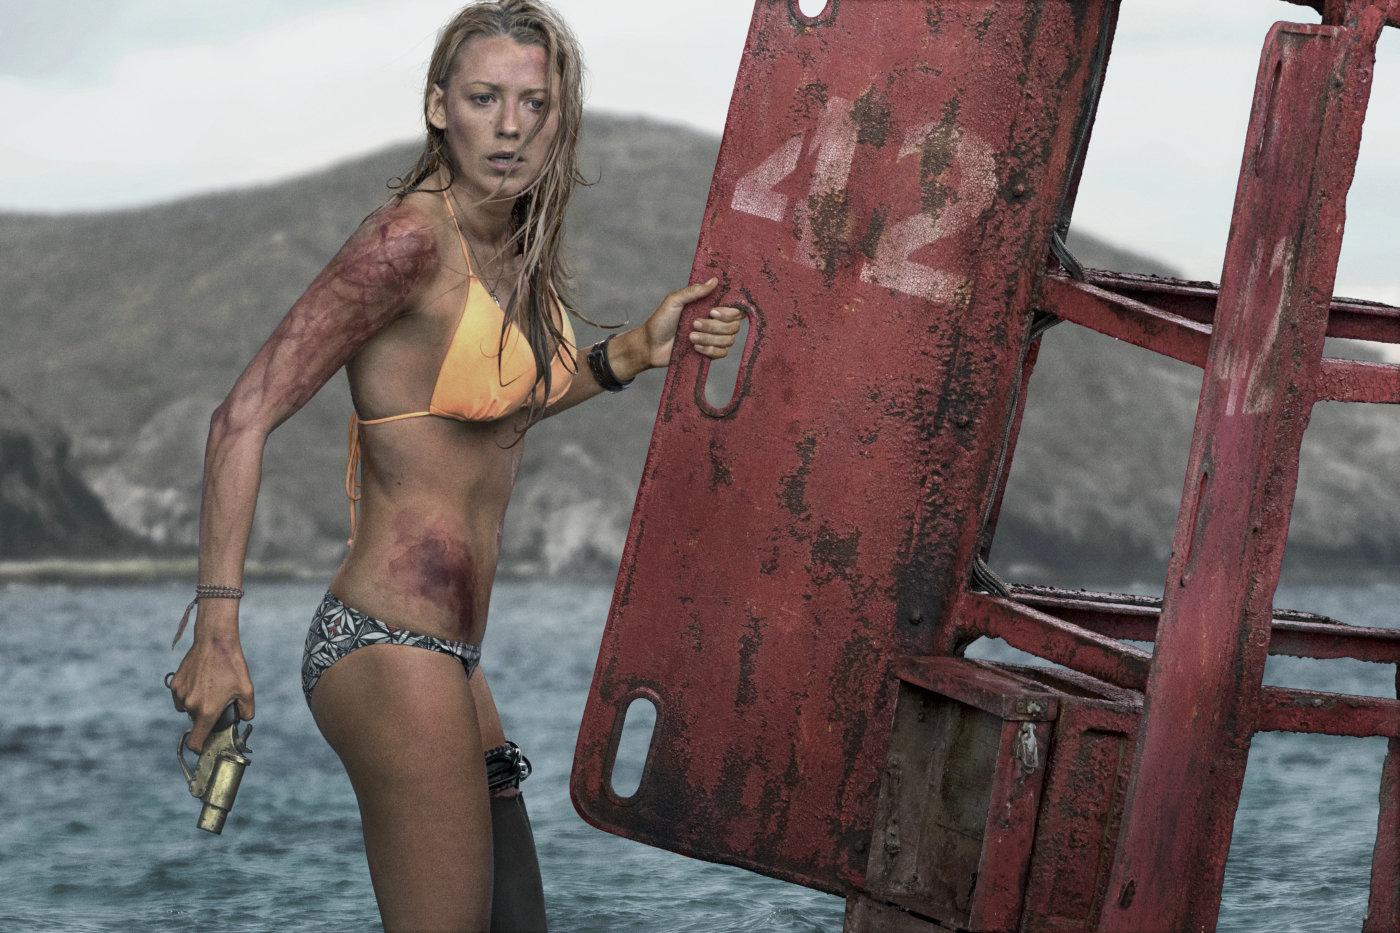 Review The Shallows